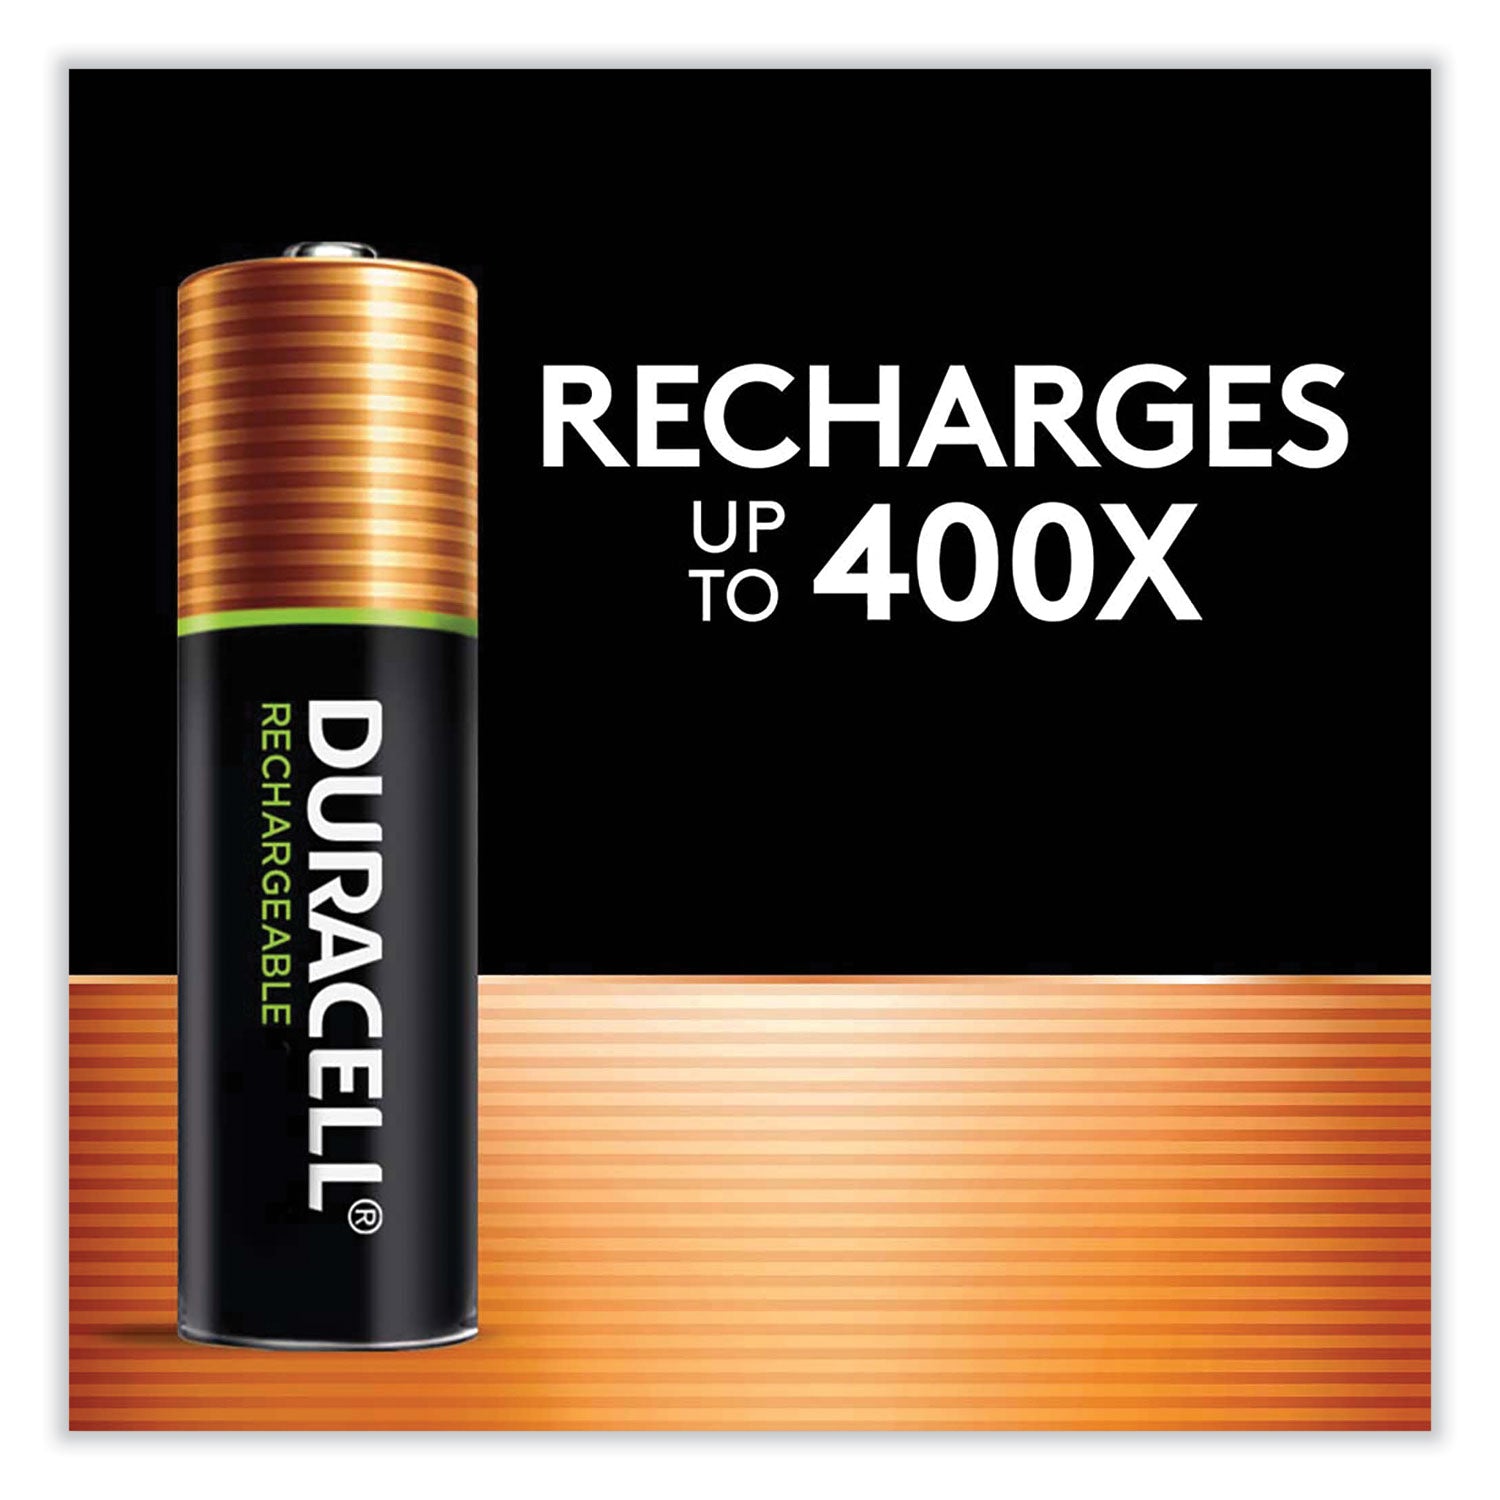 Rechargeable StayCharged NiMH Batteries, AA, 4/Pack - 